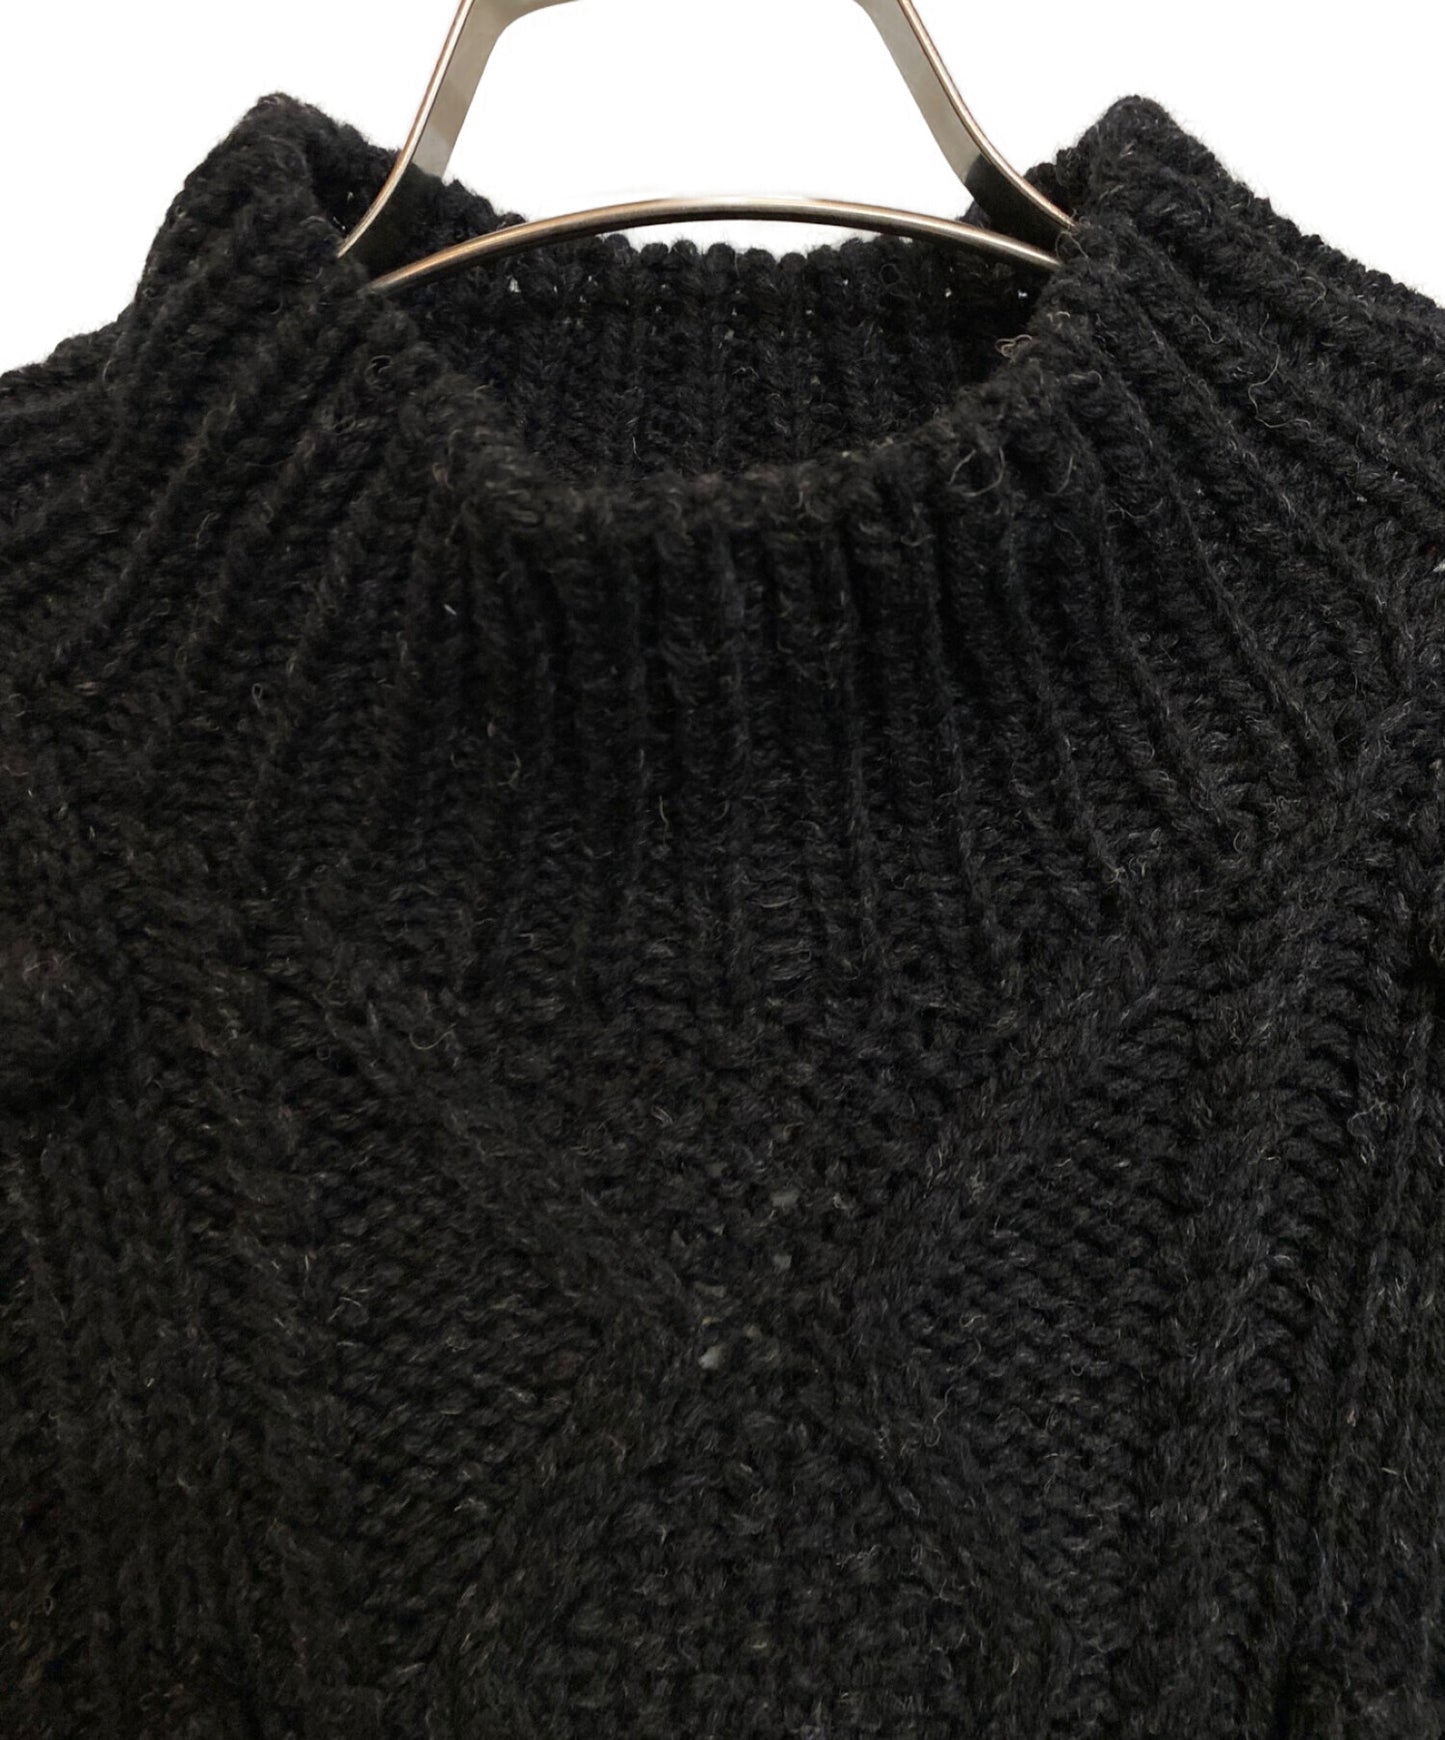 [Pre-owned] Y's HAND-KNITTED ALLAN PATTRN HIGH NECK PULLOVER YX-K97-589